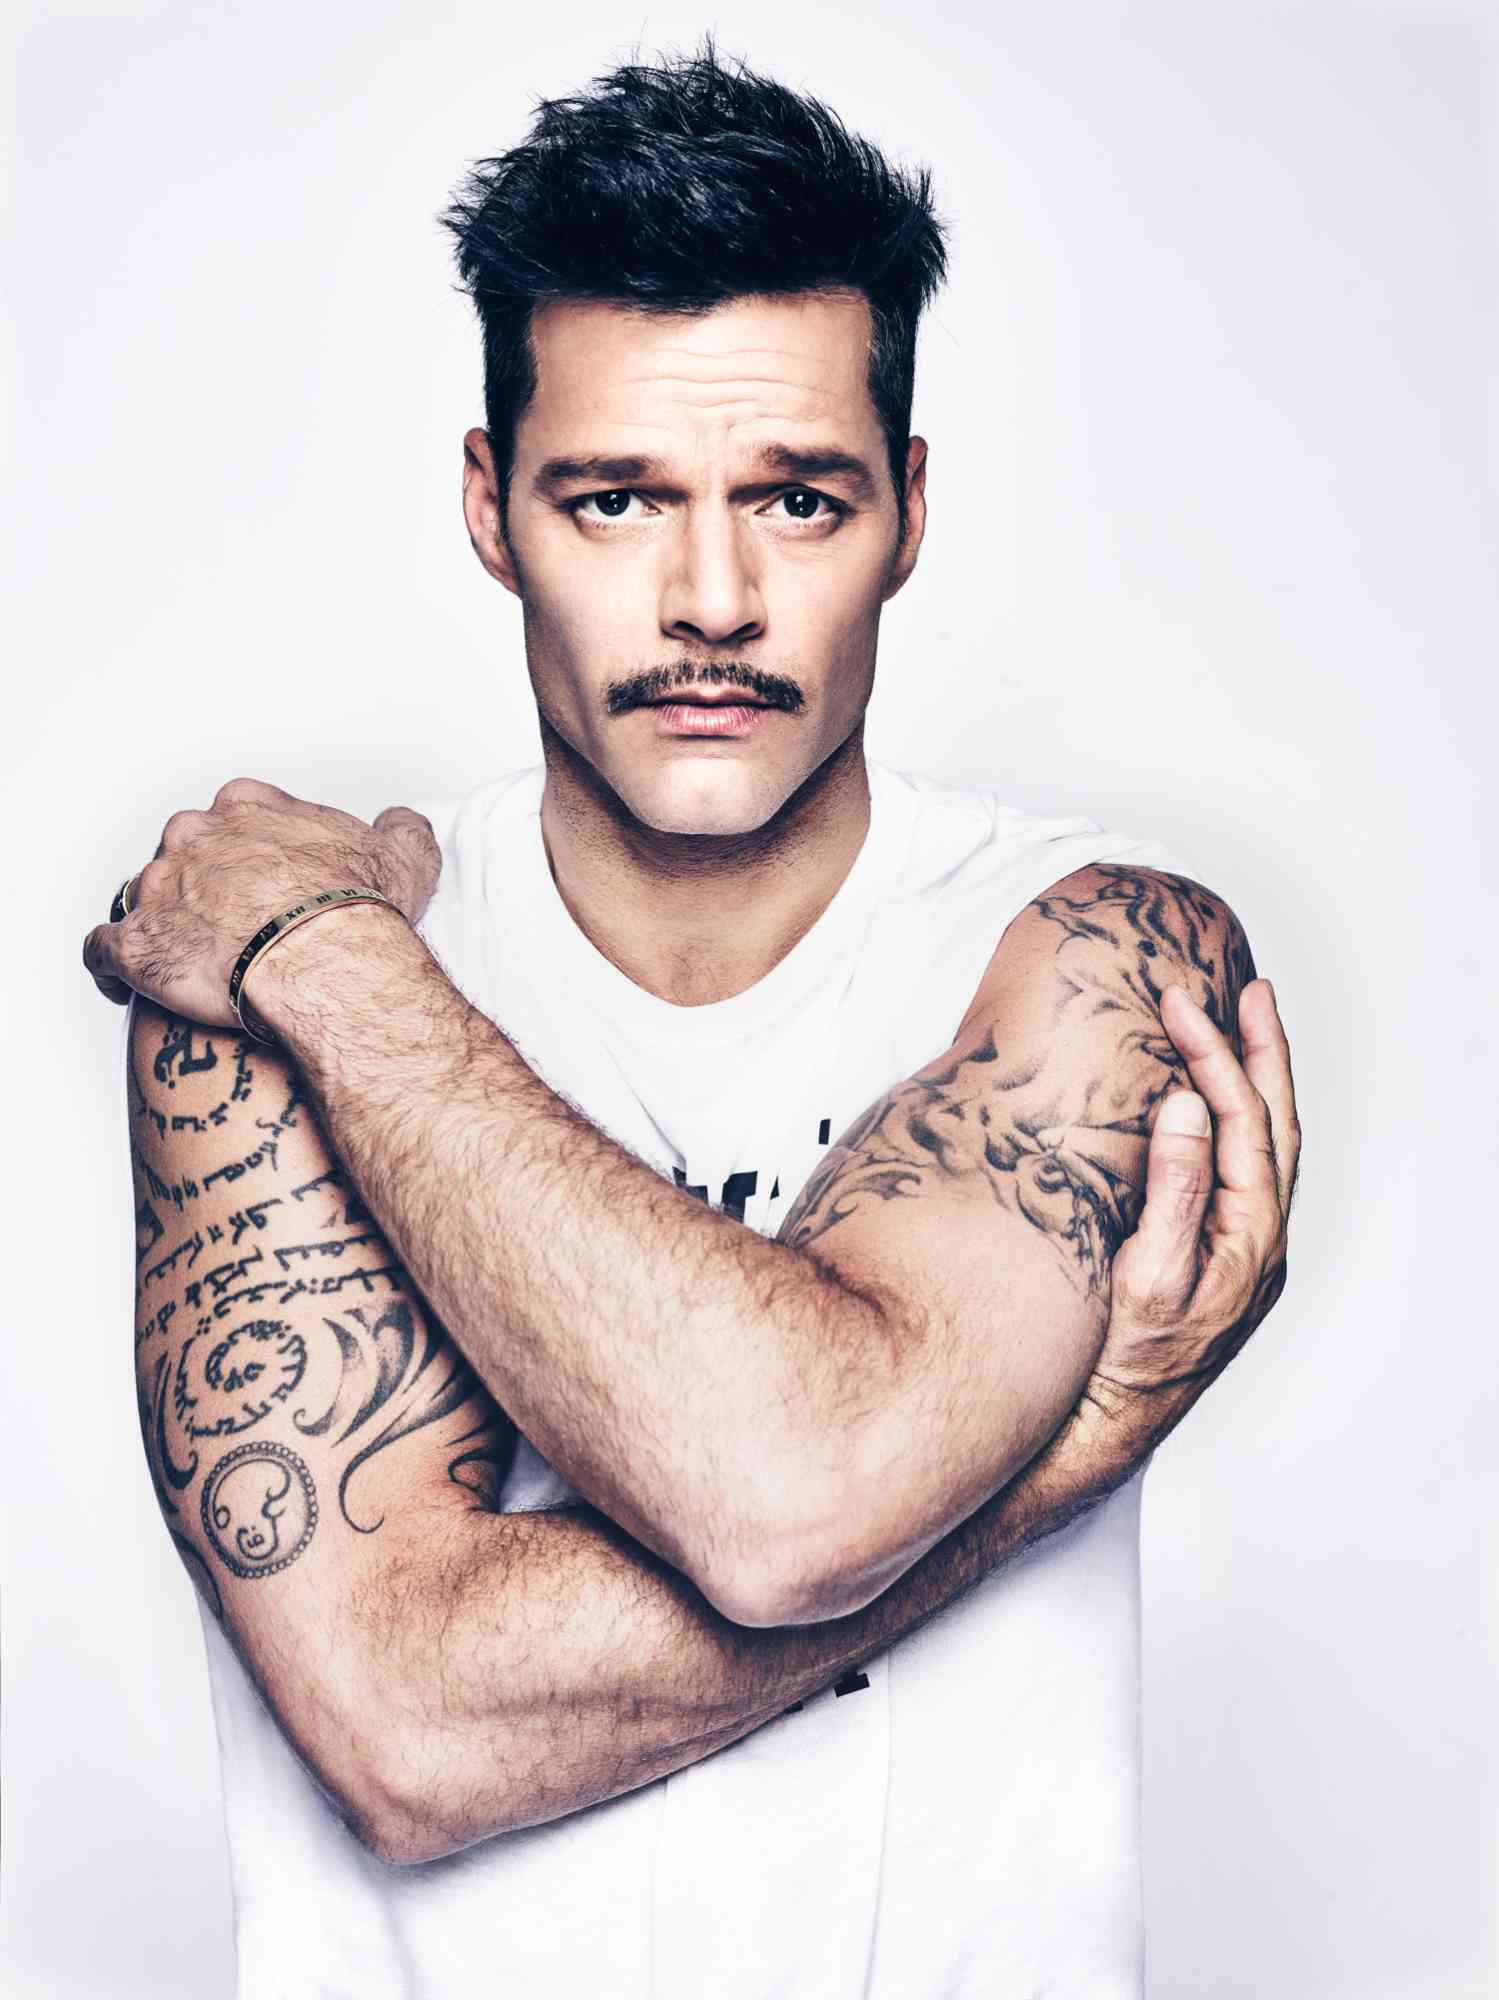 Iconic image of ricky martin songs cover shot by Warwick Saint.